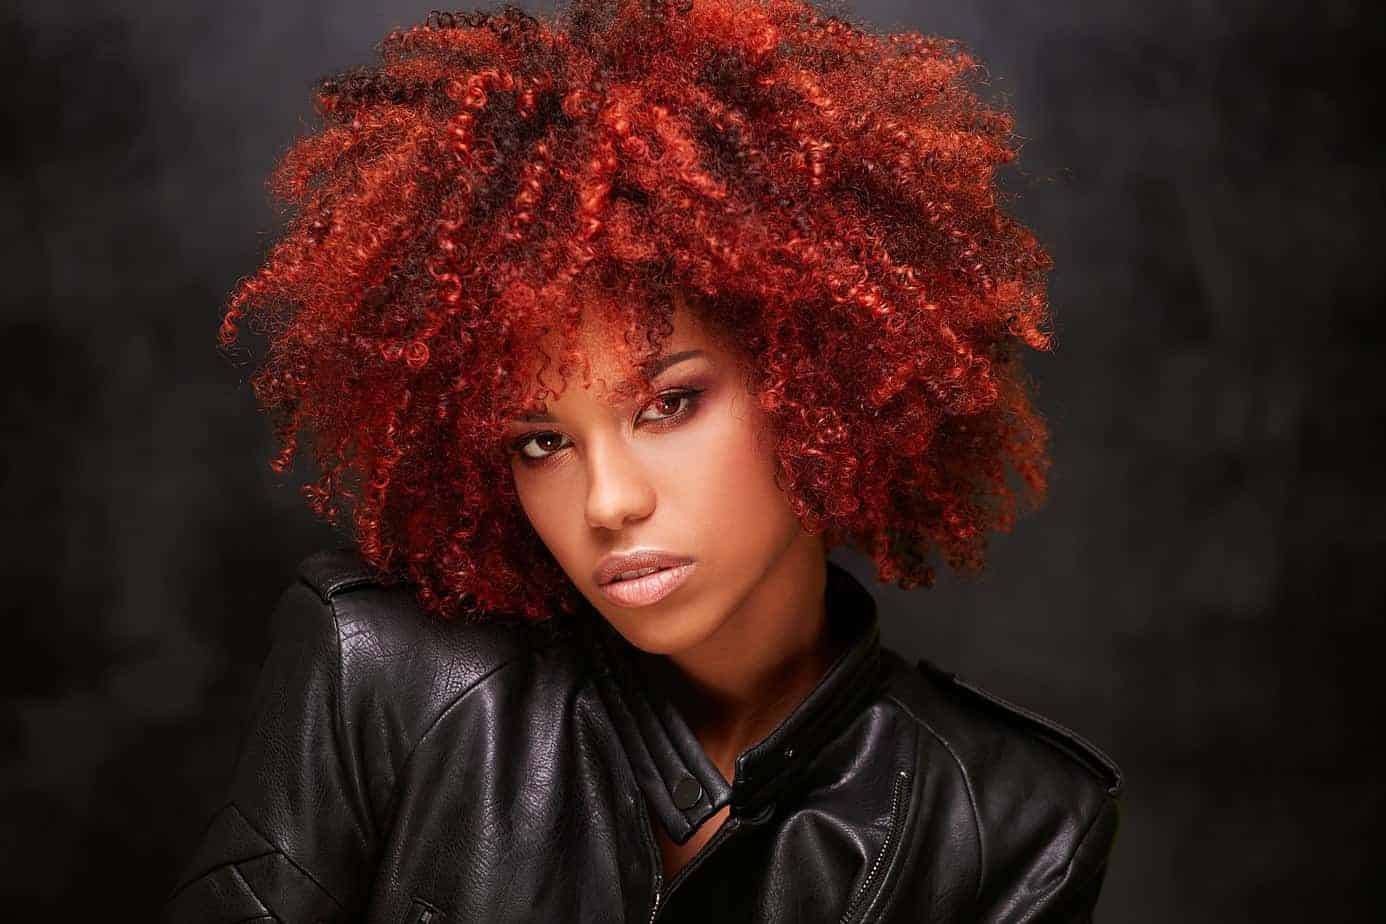 Cute black girl wearing a black motorcycle jacket with red curly hair looking directly into the camera considering the cost of dying her hair again.